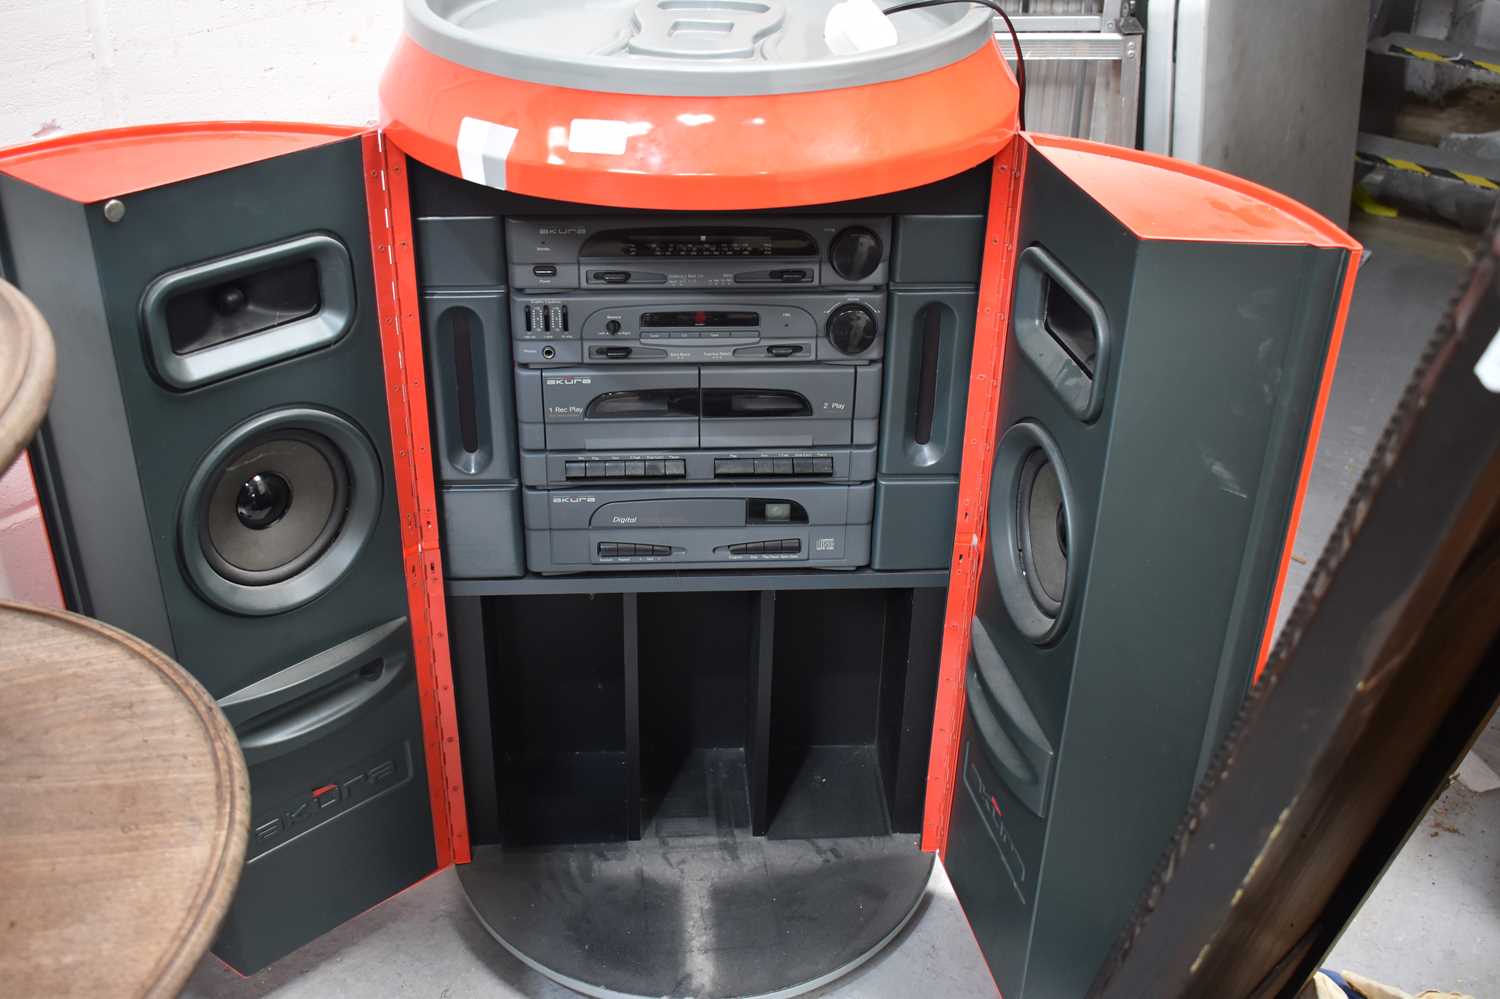 An Akura stereo system with twin cassette deck, radio and cd player, and built in speakers, all - Image 2 of 2